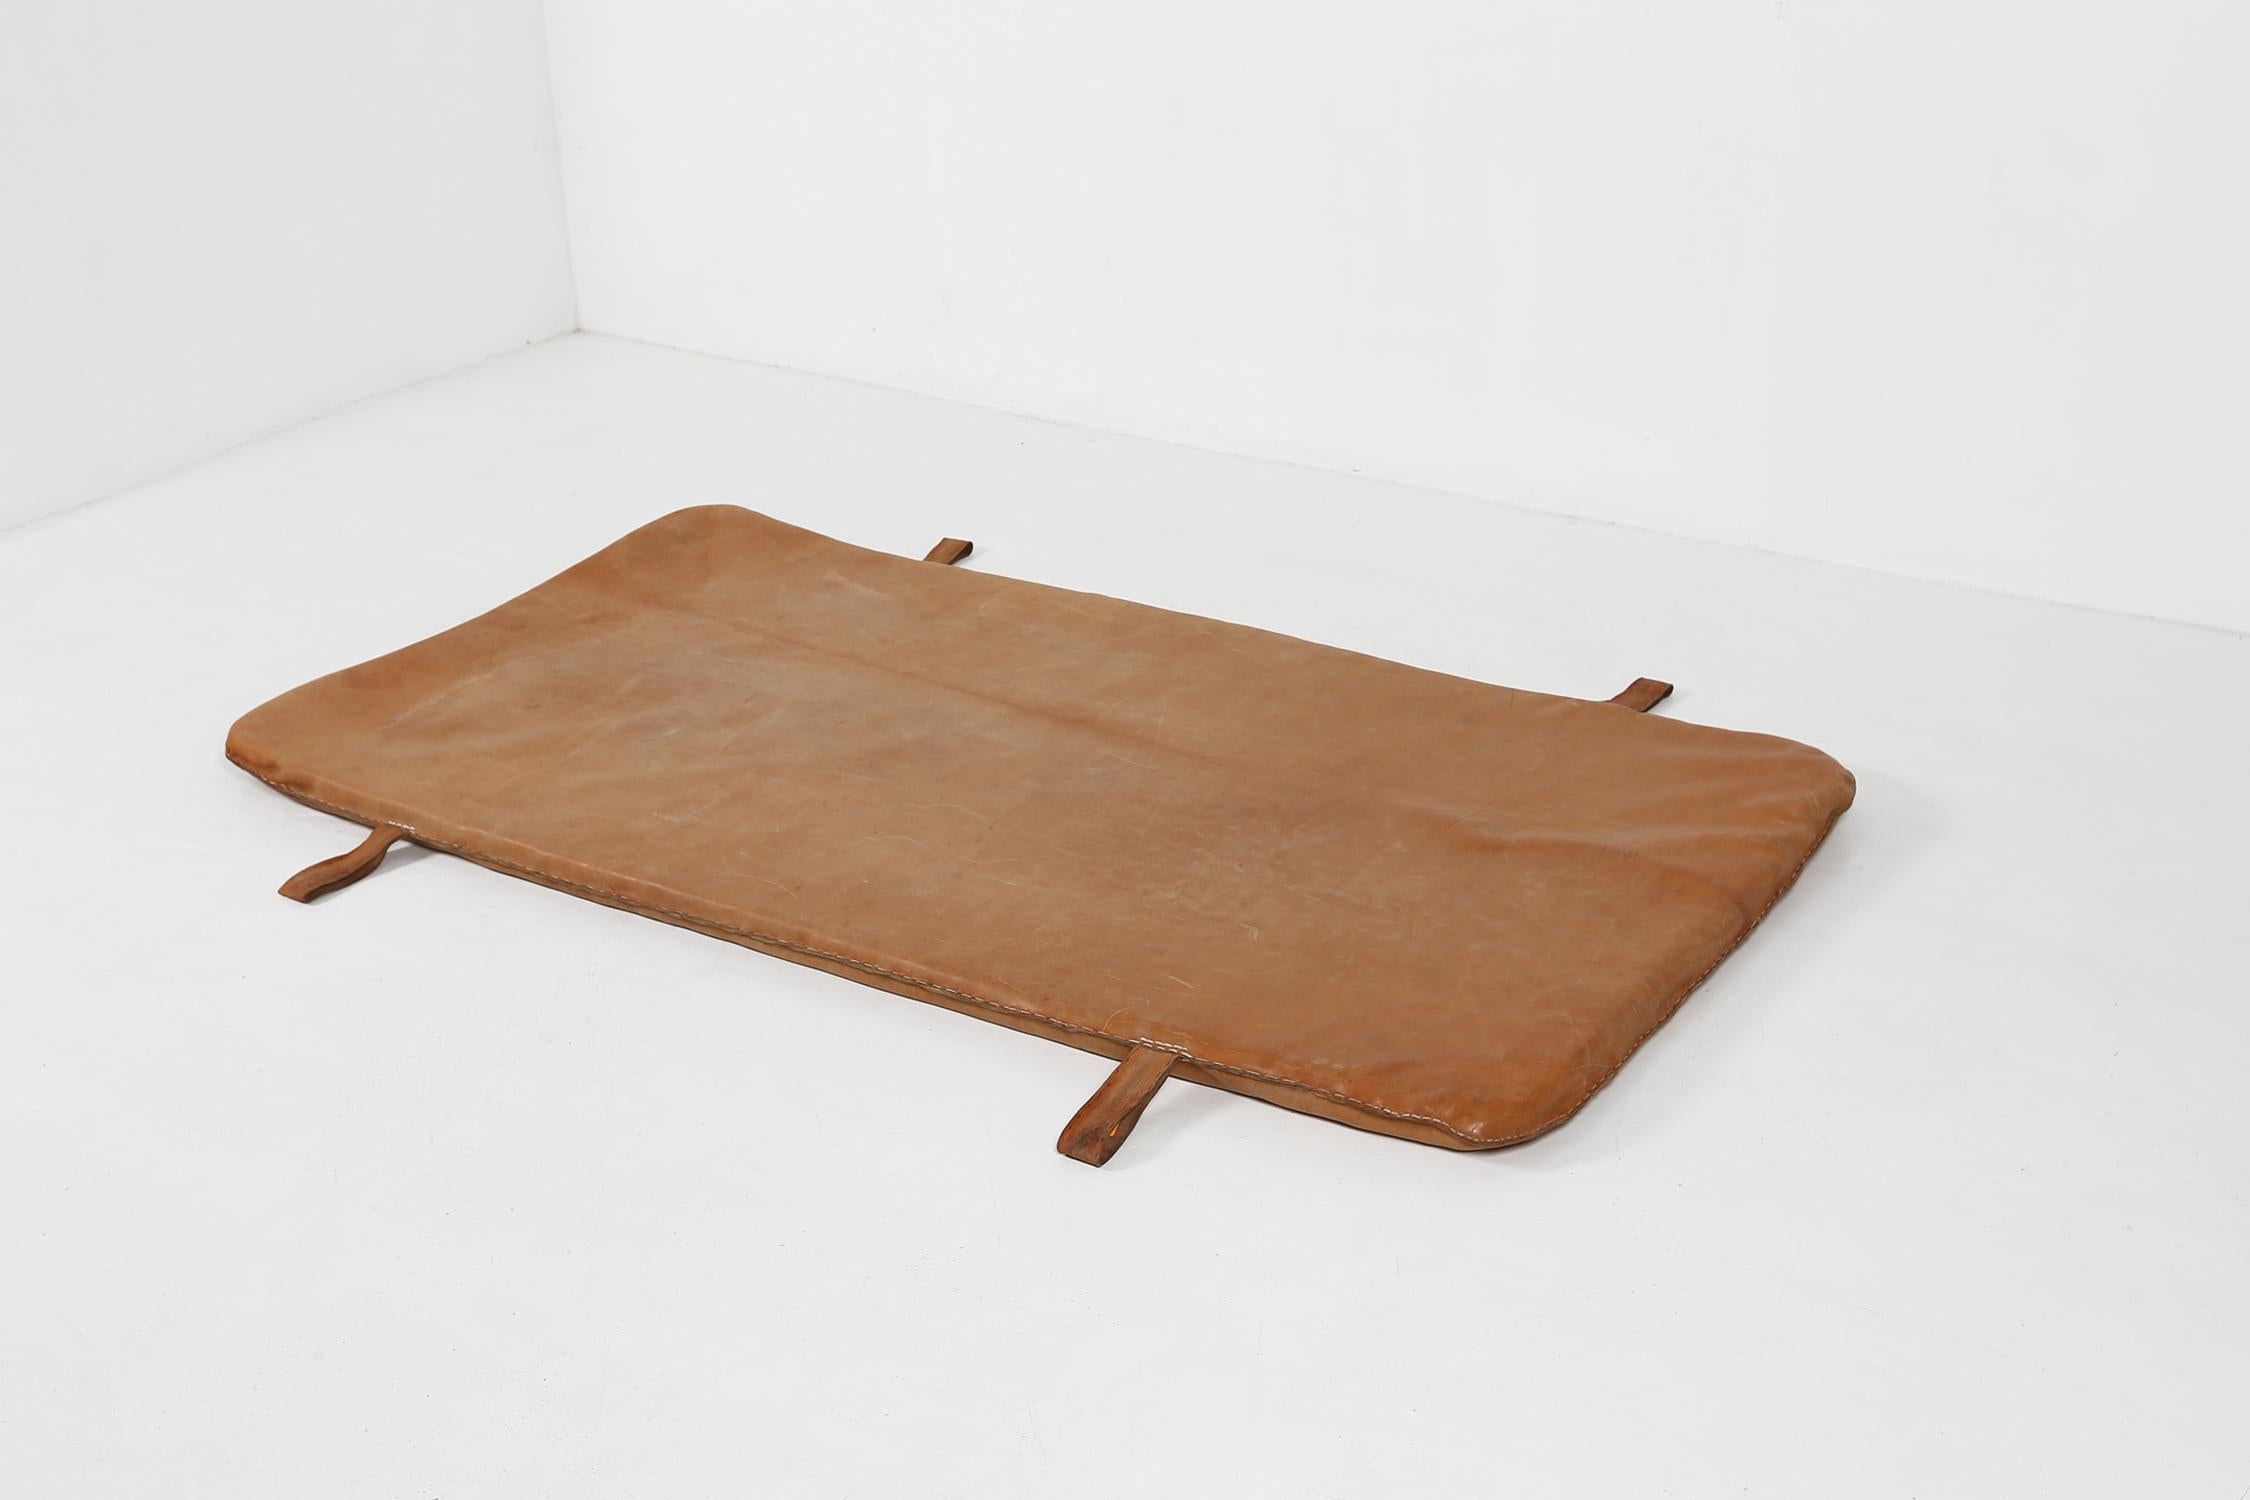 Belgium / 1930s / gym mat / brown thick cow leather / vintage / industrial  

Step back in time to the 1930s with this nice patinated leather gym mat crafted in Belgium. Made from premium brown thick cow leather, this vintage piece is an eye-catcher